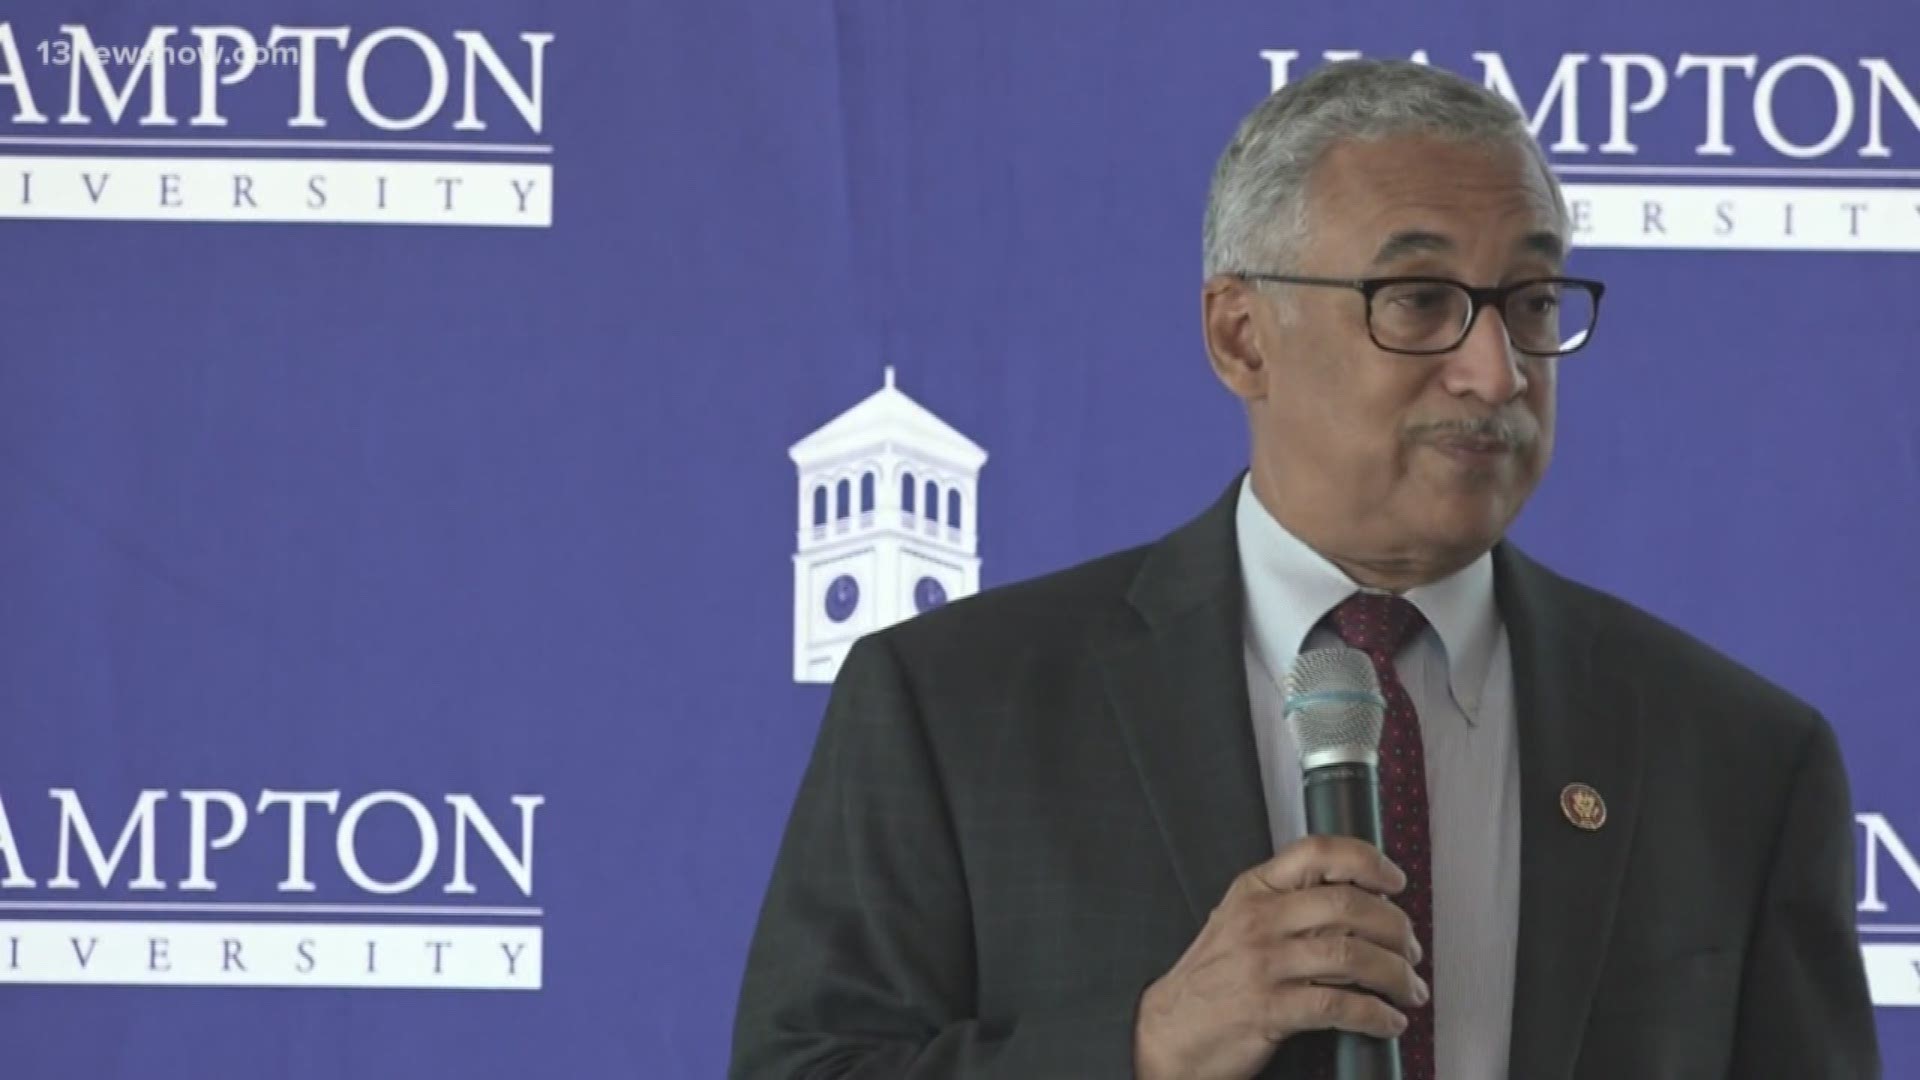 Paying for college can be quite a challenge for families across the country, including here in Virginia. So, Congressman Bobby Scott addressed the concerns.